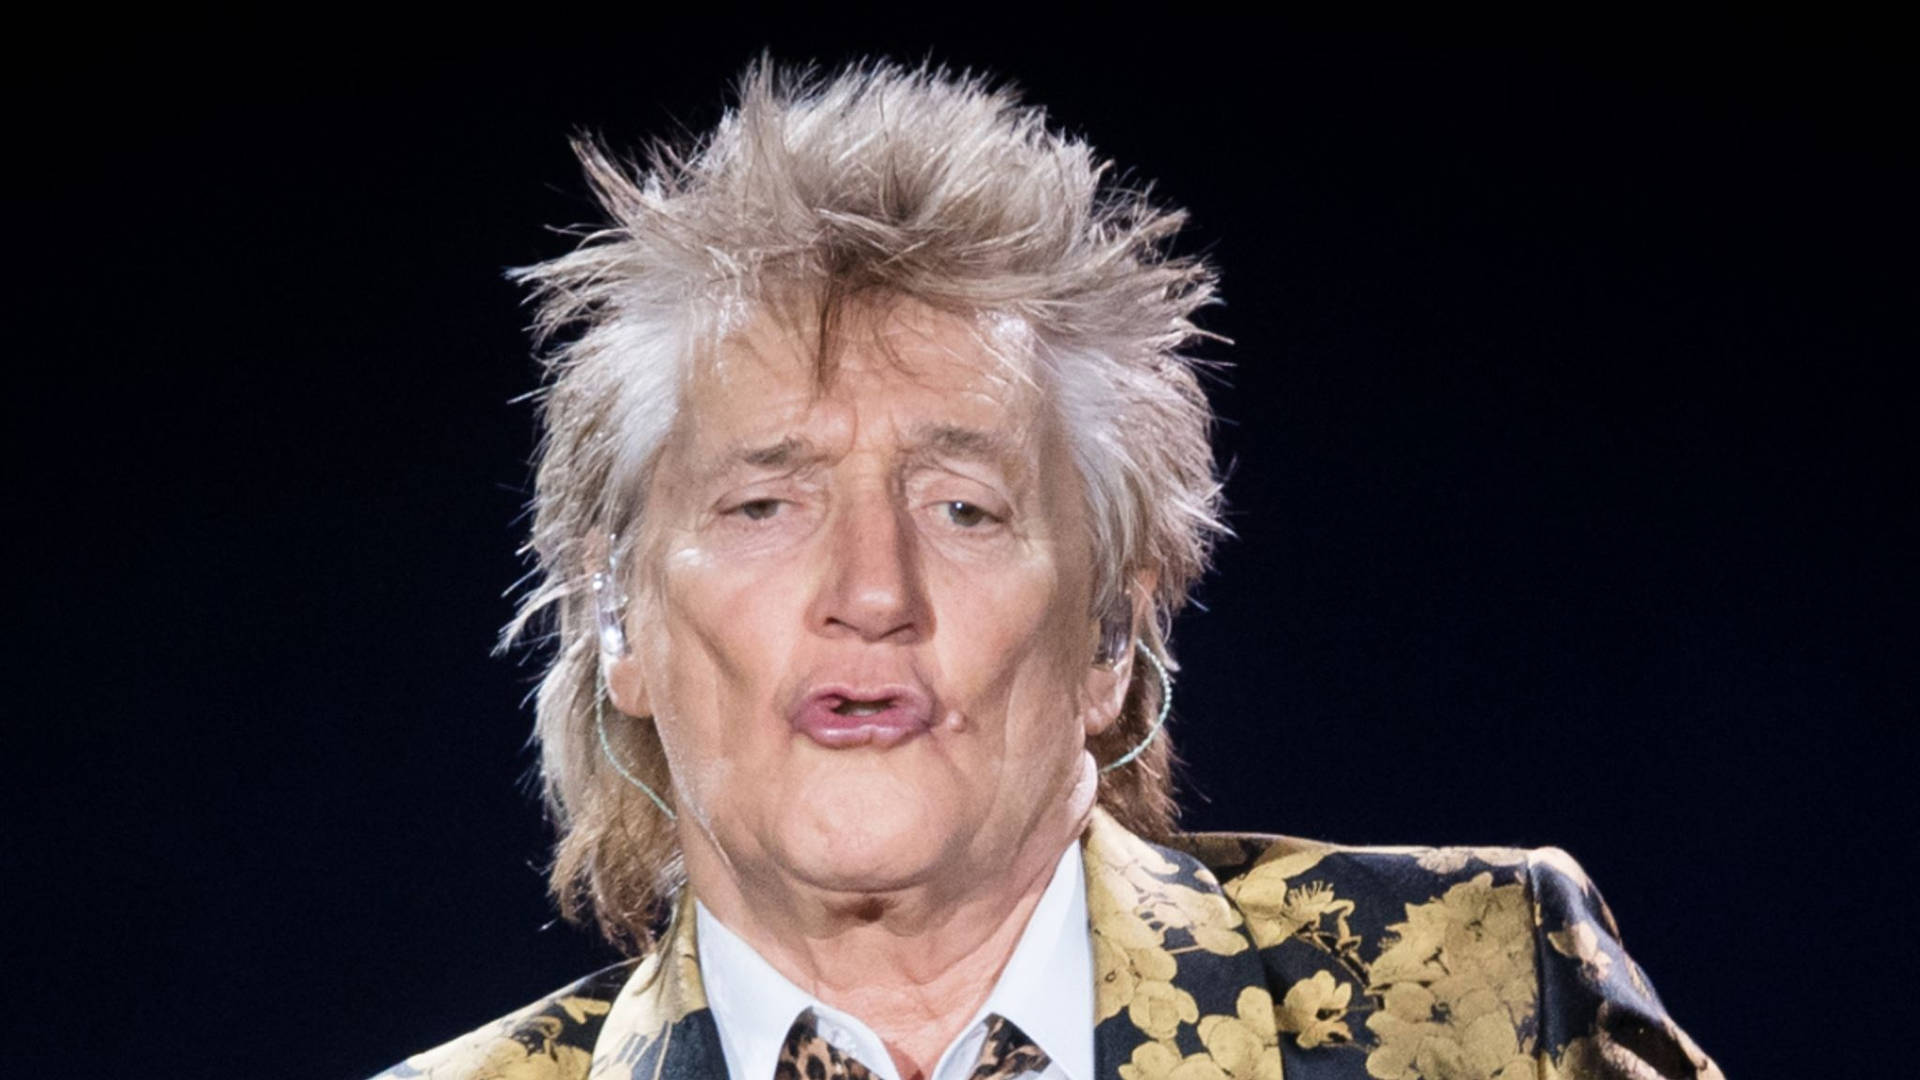 Rodstewart, Rock 'n' Roll-sångare. (this Is The Exact Translation. If We Want To Convey It In A More Fitting Form For Computer/mobile Wallpaper, We Could Say Something Like: 